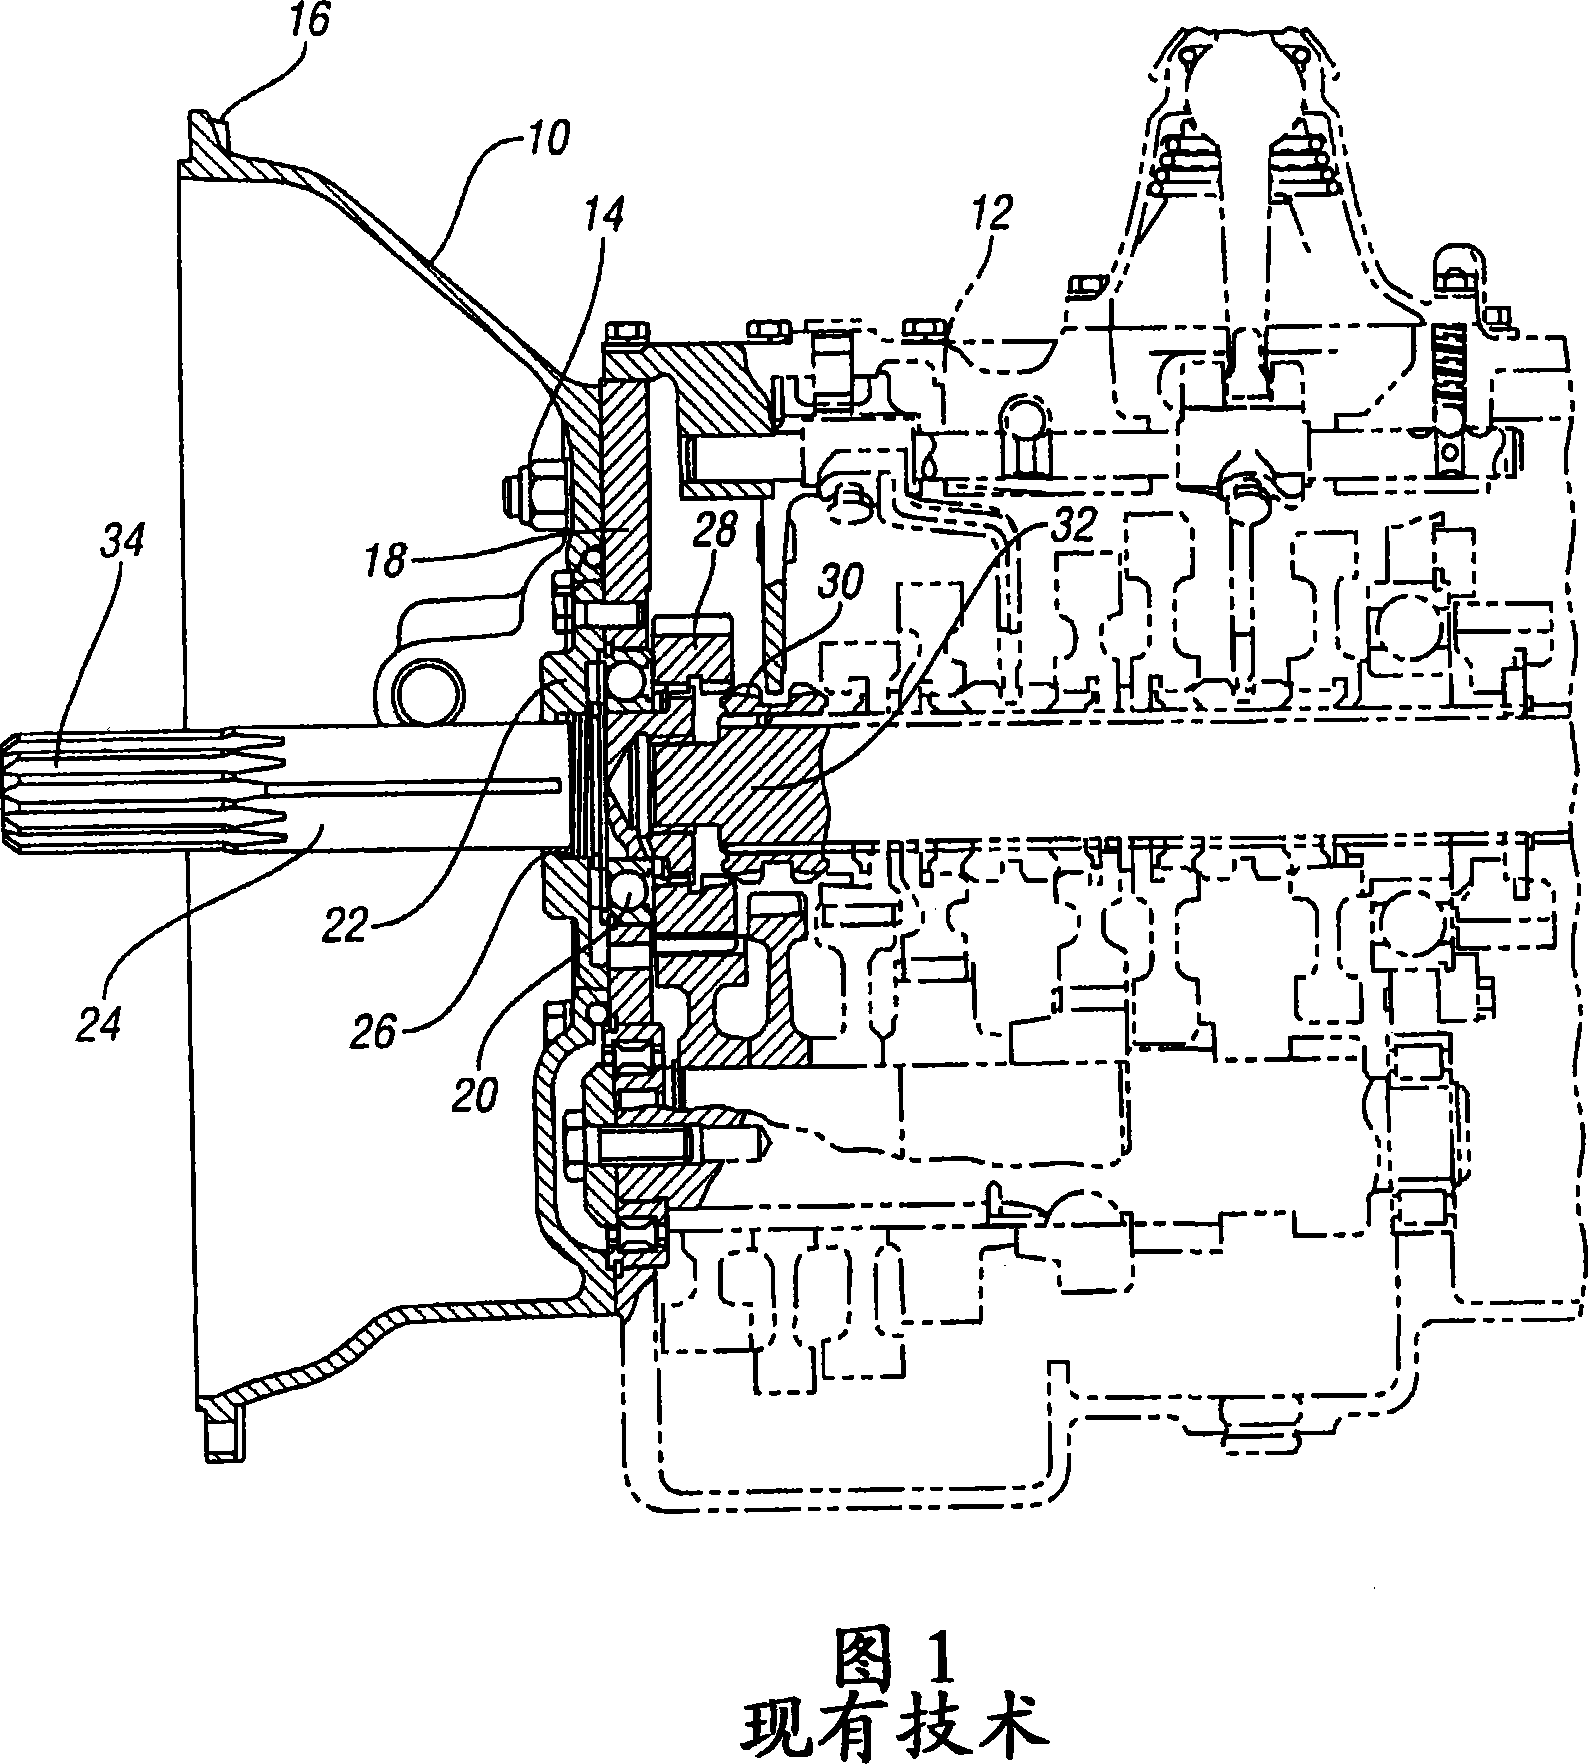 Control for an electromagnetic brake for a multiple-ratio power transmission in a vehicle powertrain